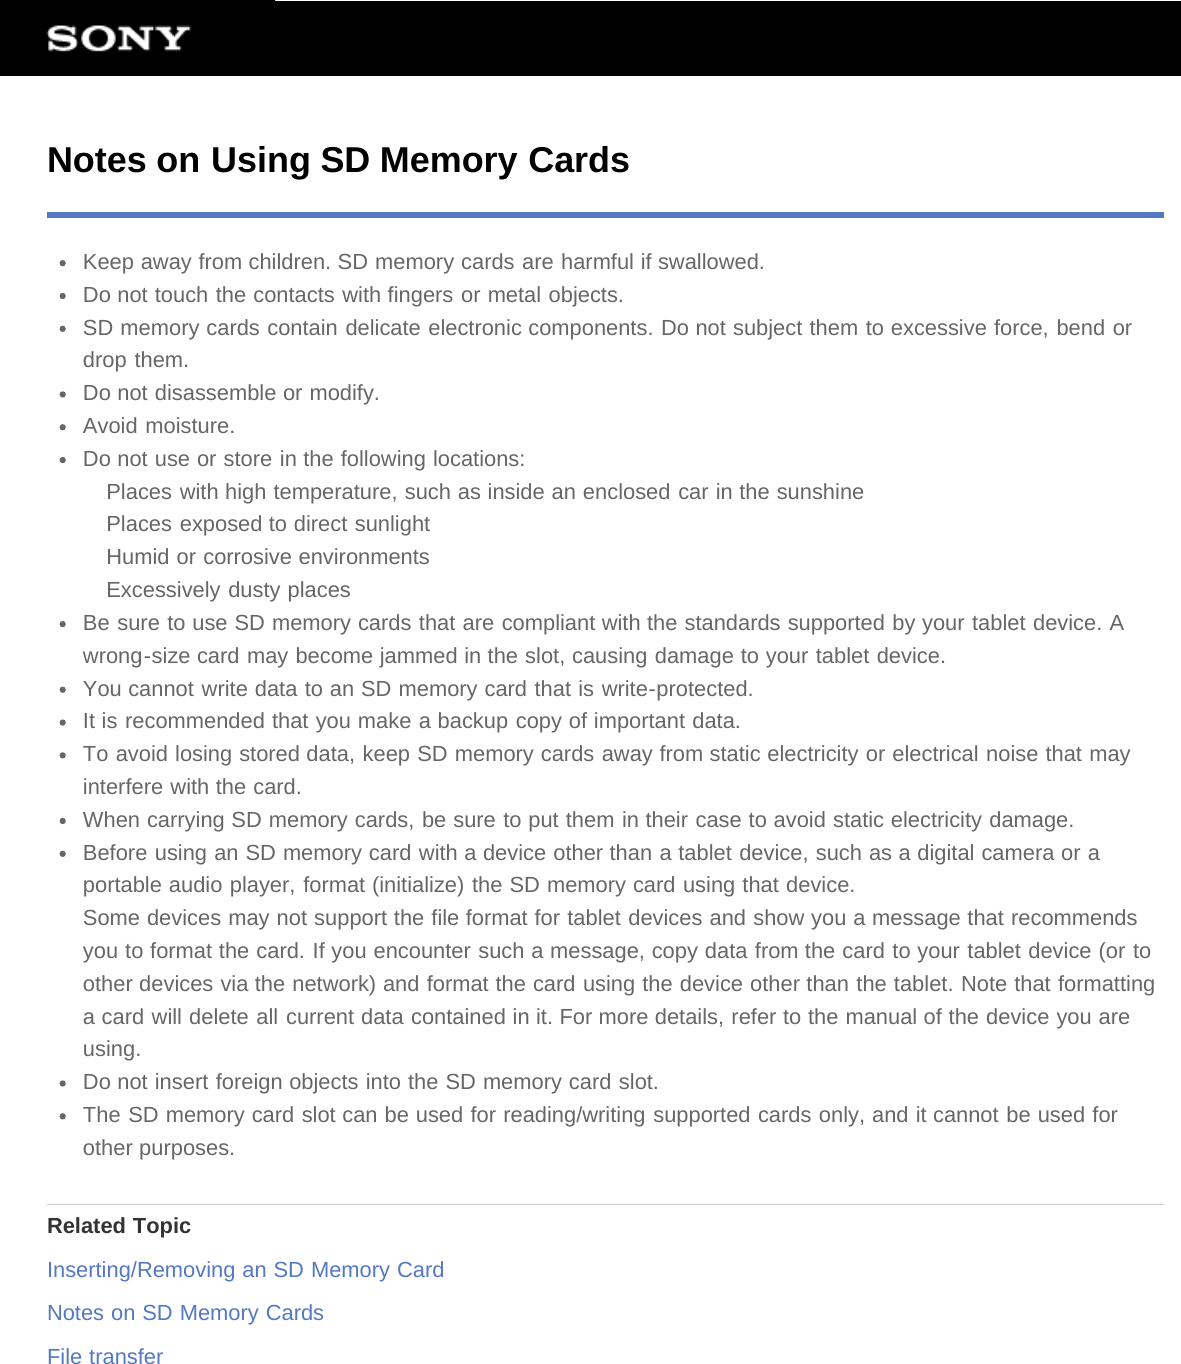 Notes on Using SD Memory CardsKeep away from children. SD memory cards are harmful if swallowed.Do not touch the contacts with fingers or metal objects.SD memory cards contain delicate electronic components. Do not subject them to excessive force, bend ordrop them.Do not disassemble or modify.Avoid moisture.Do not use or store in the following locations:Places with high temperature, such as inside an enclosed car in the sunshinePlaces exposed to direct sunlightHumid or corrosive environmentsExcessively dusty placesBe sure to use SD memory cards that are compliant with the standards supported by your tablet device. Awrong-size card may become jammed in the slot, causing damage to your tablet device.You cannot write data to an SD memory card that is write-protected.It is recommended that you make a backup copy of important data.To avoid losing stored data, keep SD memory cards away from static electricity or electrical noise that mayinterfere with the card.When carrying SD memory cards, be sure to put them in their case to avoid static electricity damage.Before using an SD memory card with a device other than a tablet device, such as a digital camera or aportable audio player, format (initialize) the SD memory card using that device.Some devices may not support the file format for tablet devices and show you a message that recommendsyou to format the card. If you encounter such a message, copy data from the card to your tablet device (or toother devices via the network) and format the card using the device other than the tablet. Note that formattinga card will delete all current data contained in it. For more details, refer to the manual of the device you areusing.Do not insert foreign objects into the SD memory card slot.The SD memory card slot can be used for reading/writing supported cards only, and it cannot be used forother purposes.Related TopicInserting/Removing an SD Memory CardNotes on SD Memory CardsFile transfer